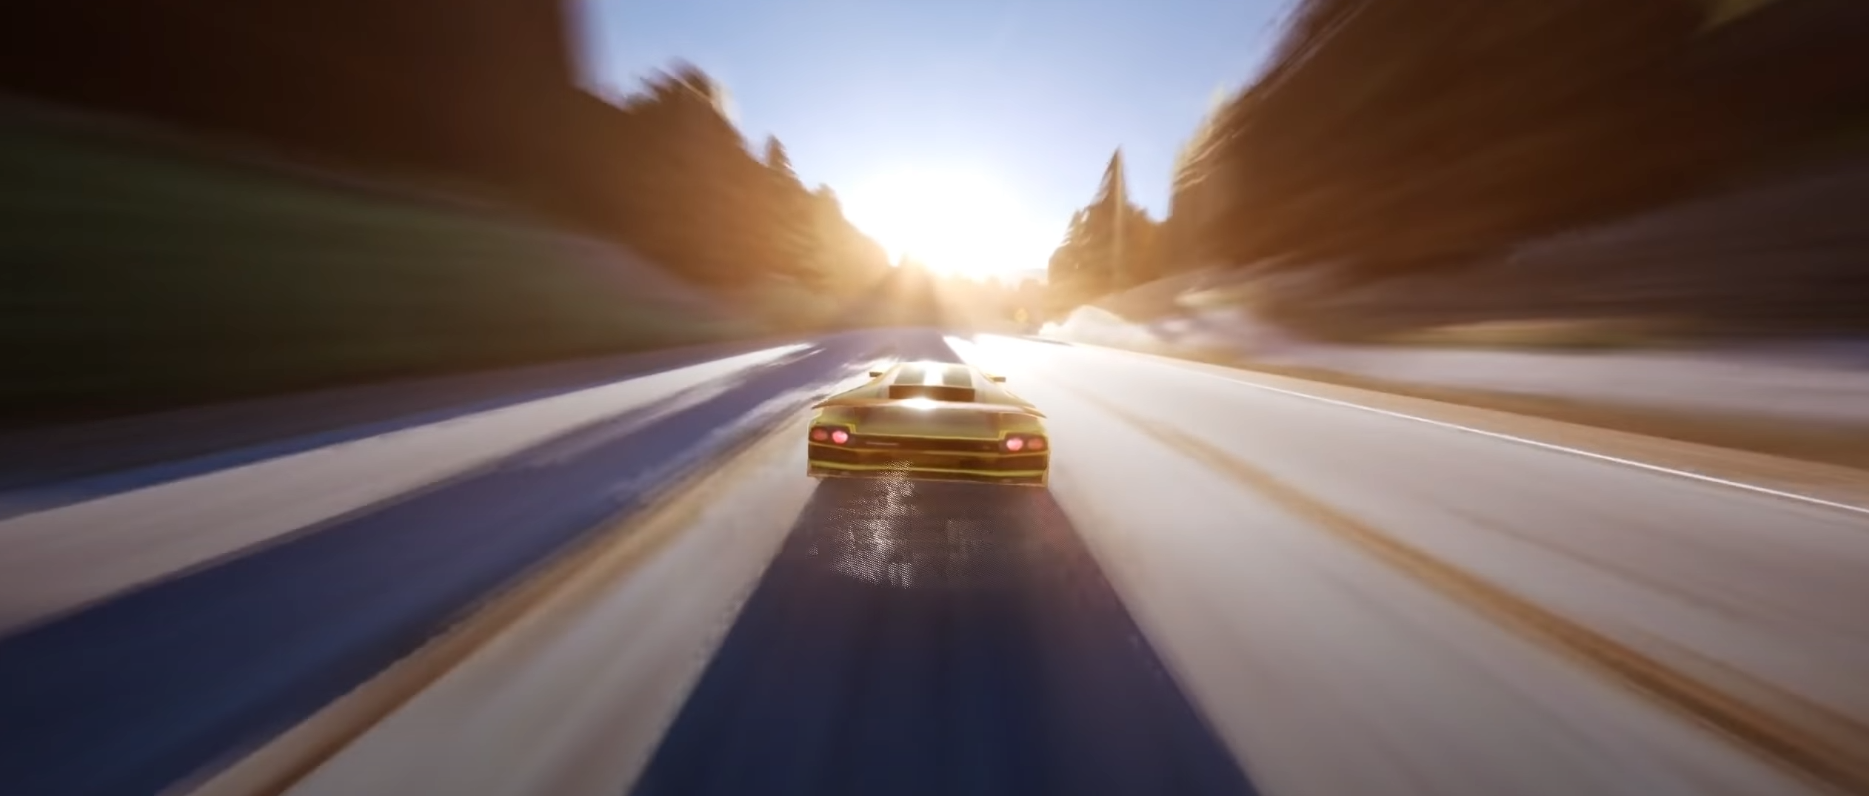 Someone Is Remaking Need For Speed Underground 2 In Unreal Engine 4